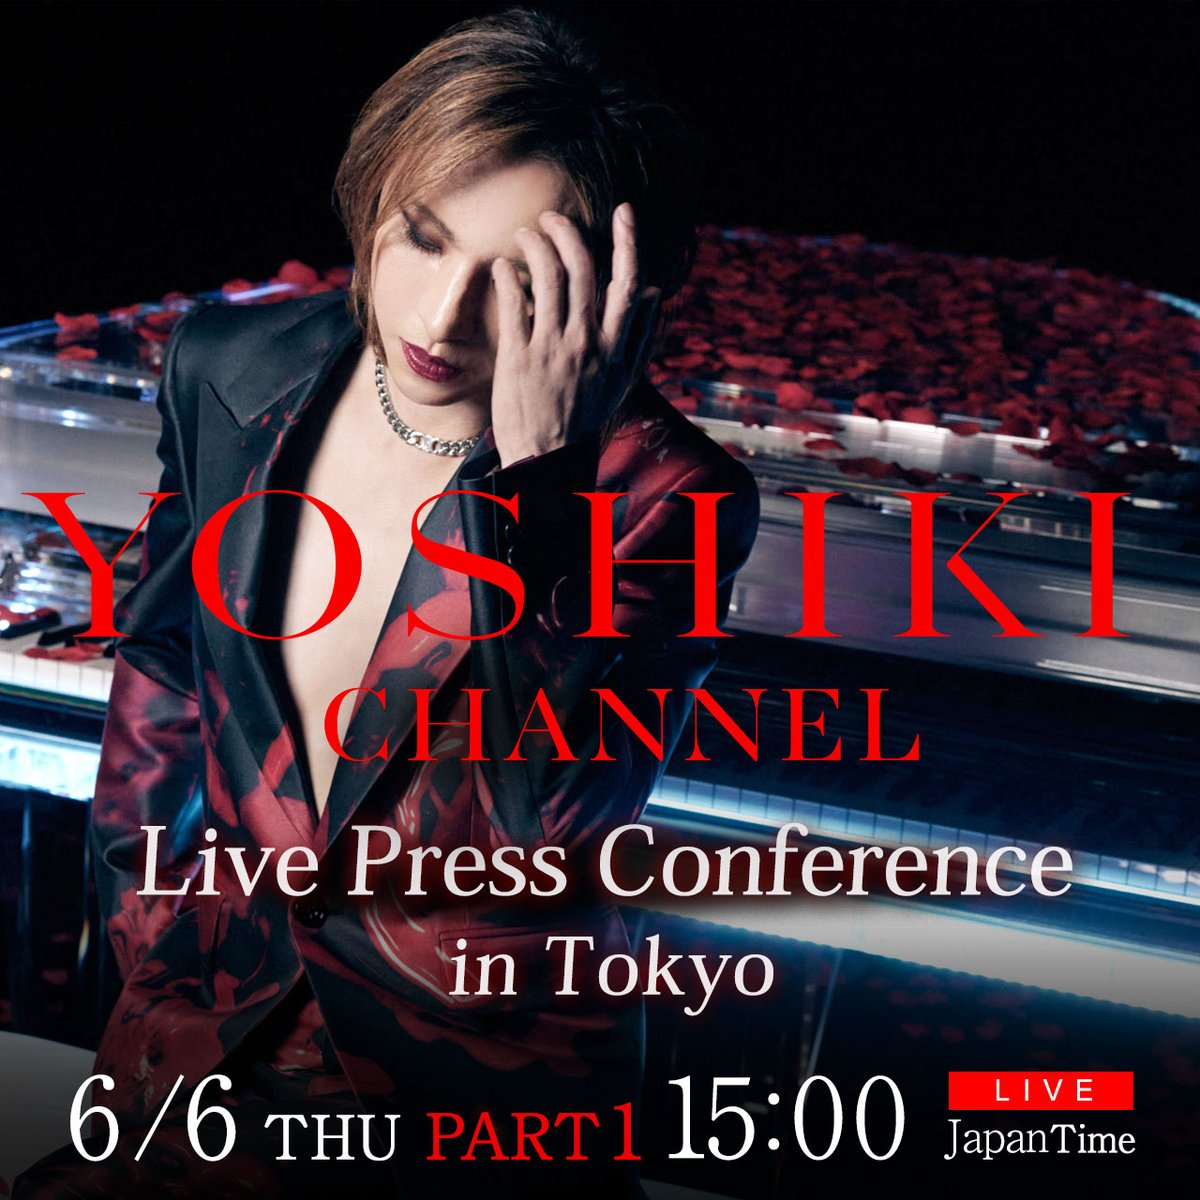 June 6th #YOSHIKICHANNEL
<PART1> 3pm Japan Time
#YOSHIKI will make an announcement at the press conference!

YouTube (Japanese or Bilingual)
youtube.com/live/HqDLWSIEU…

niconico (Japanese)
ch.nicovideo.jp/yoshikiofficia…

Don't miss it!

@YoshikiOfficial